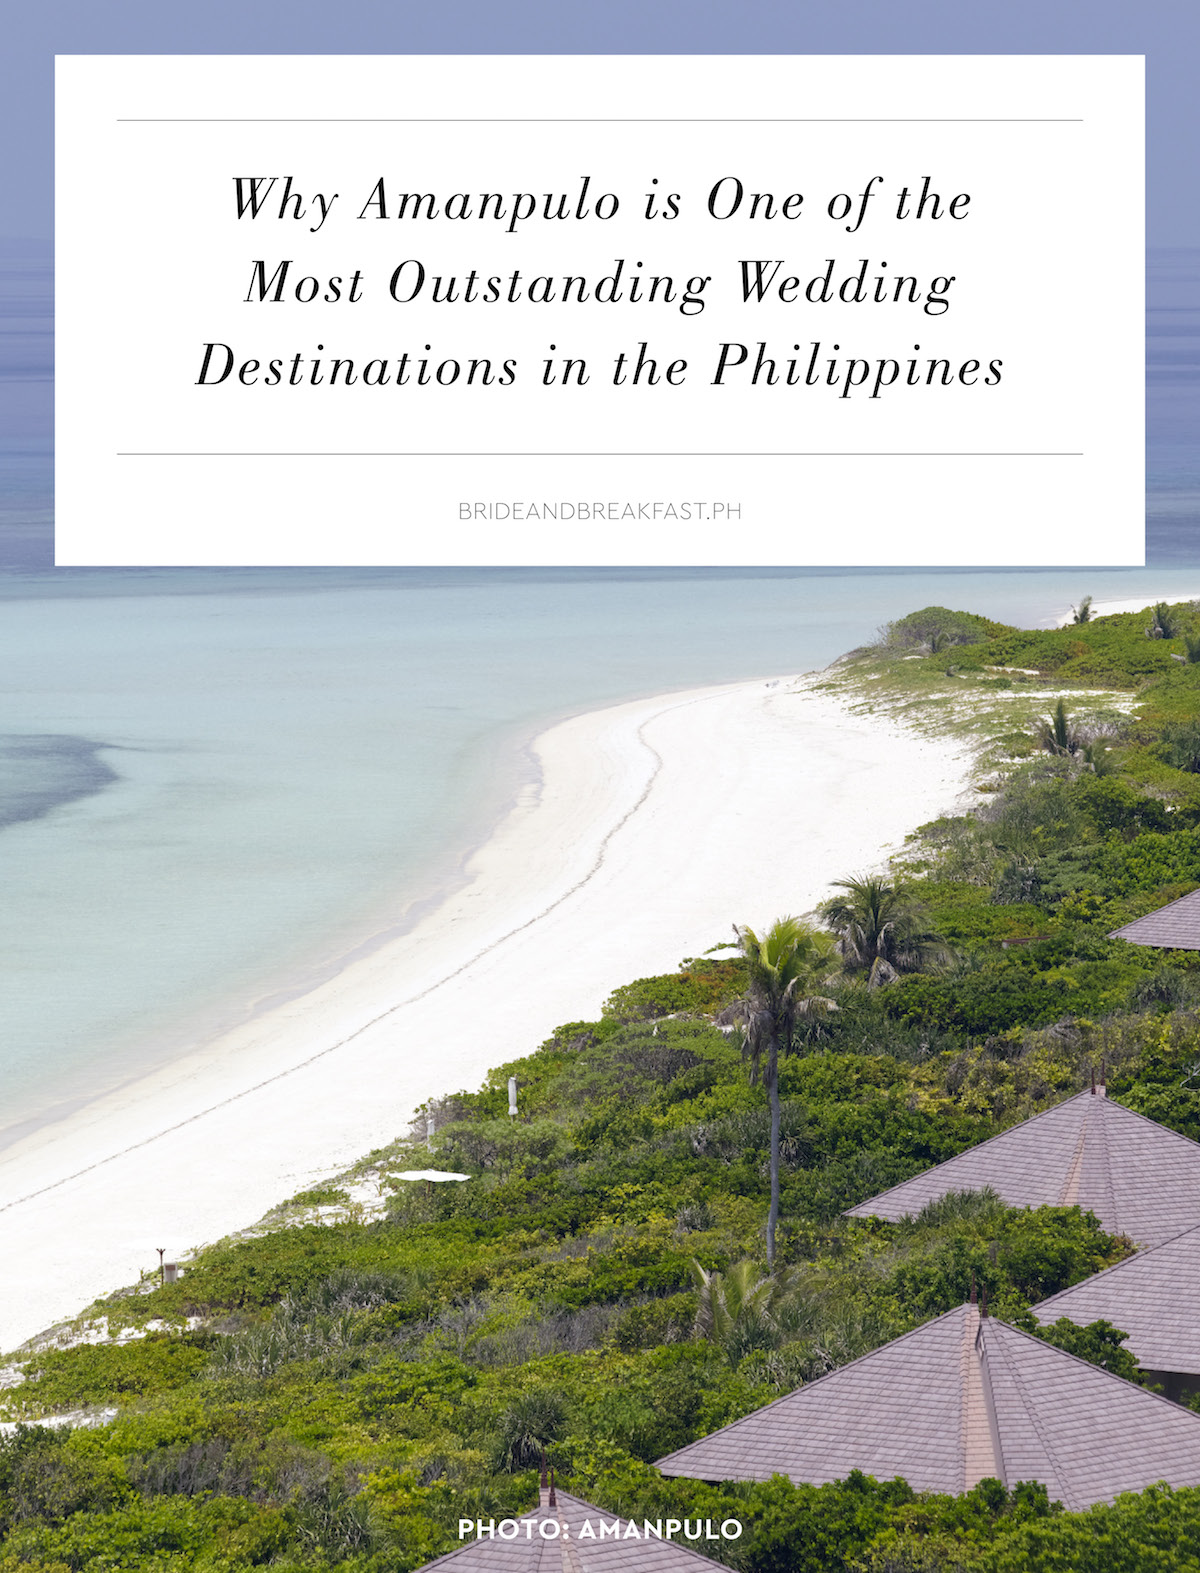 Why Amanpulo is One of the Most Outstanding Wedding Destinations in the Philippines Photo: Amanpulo